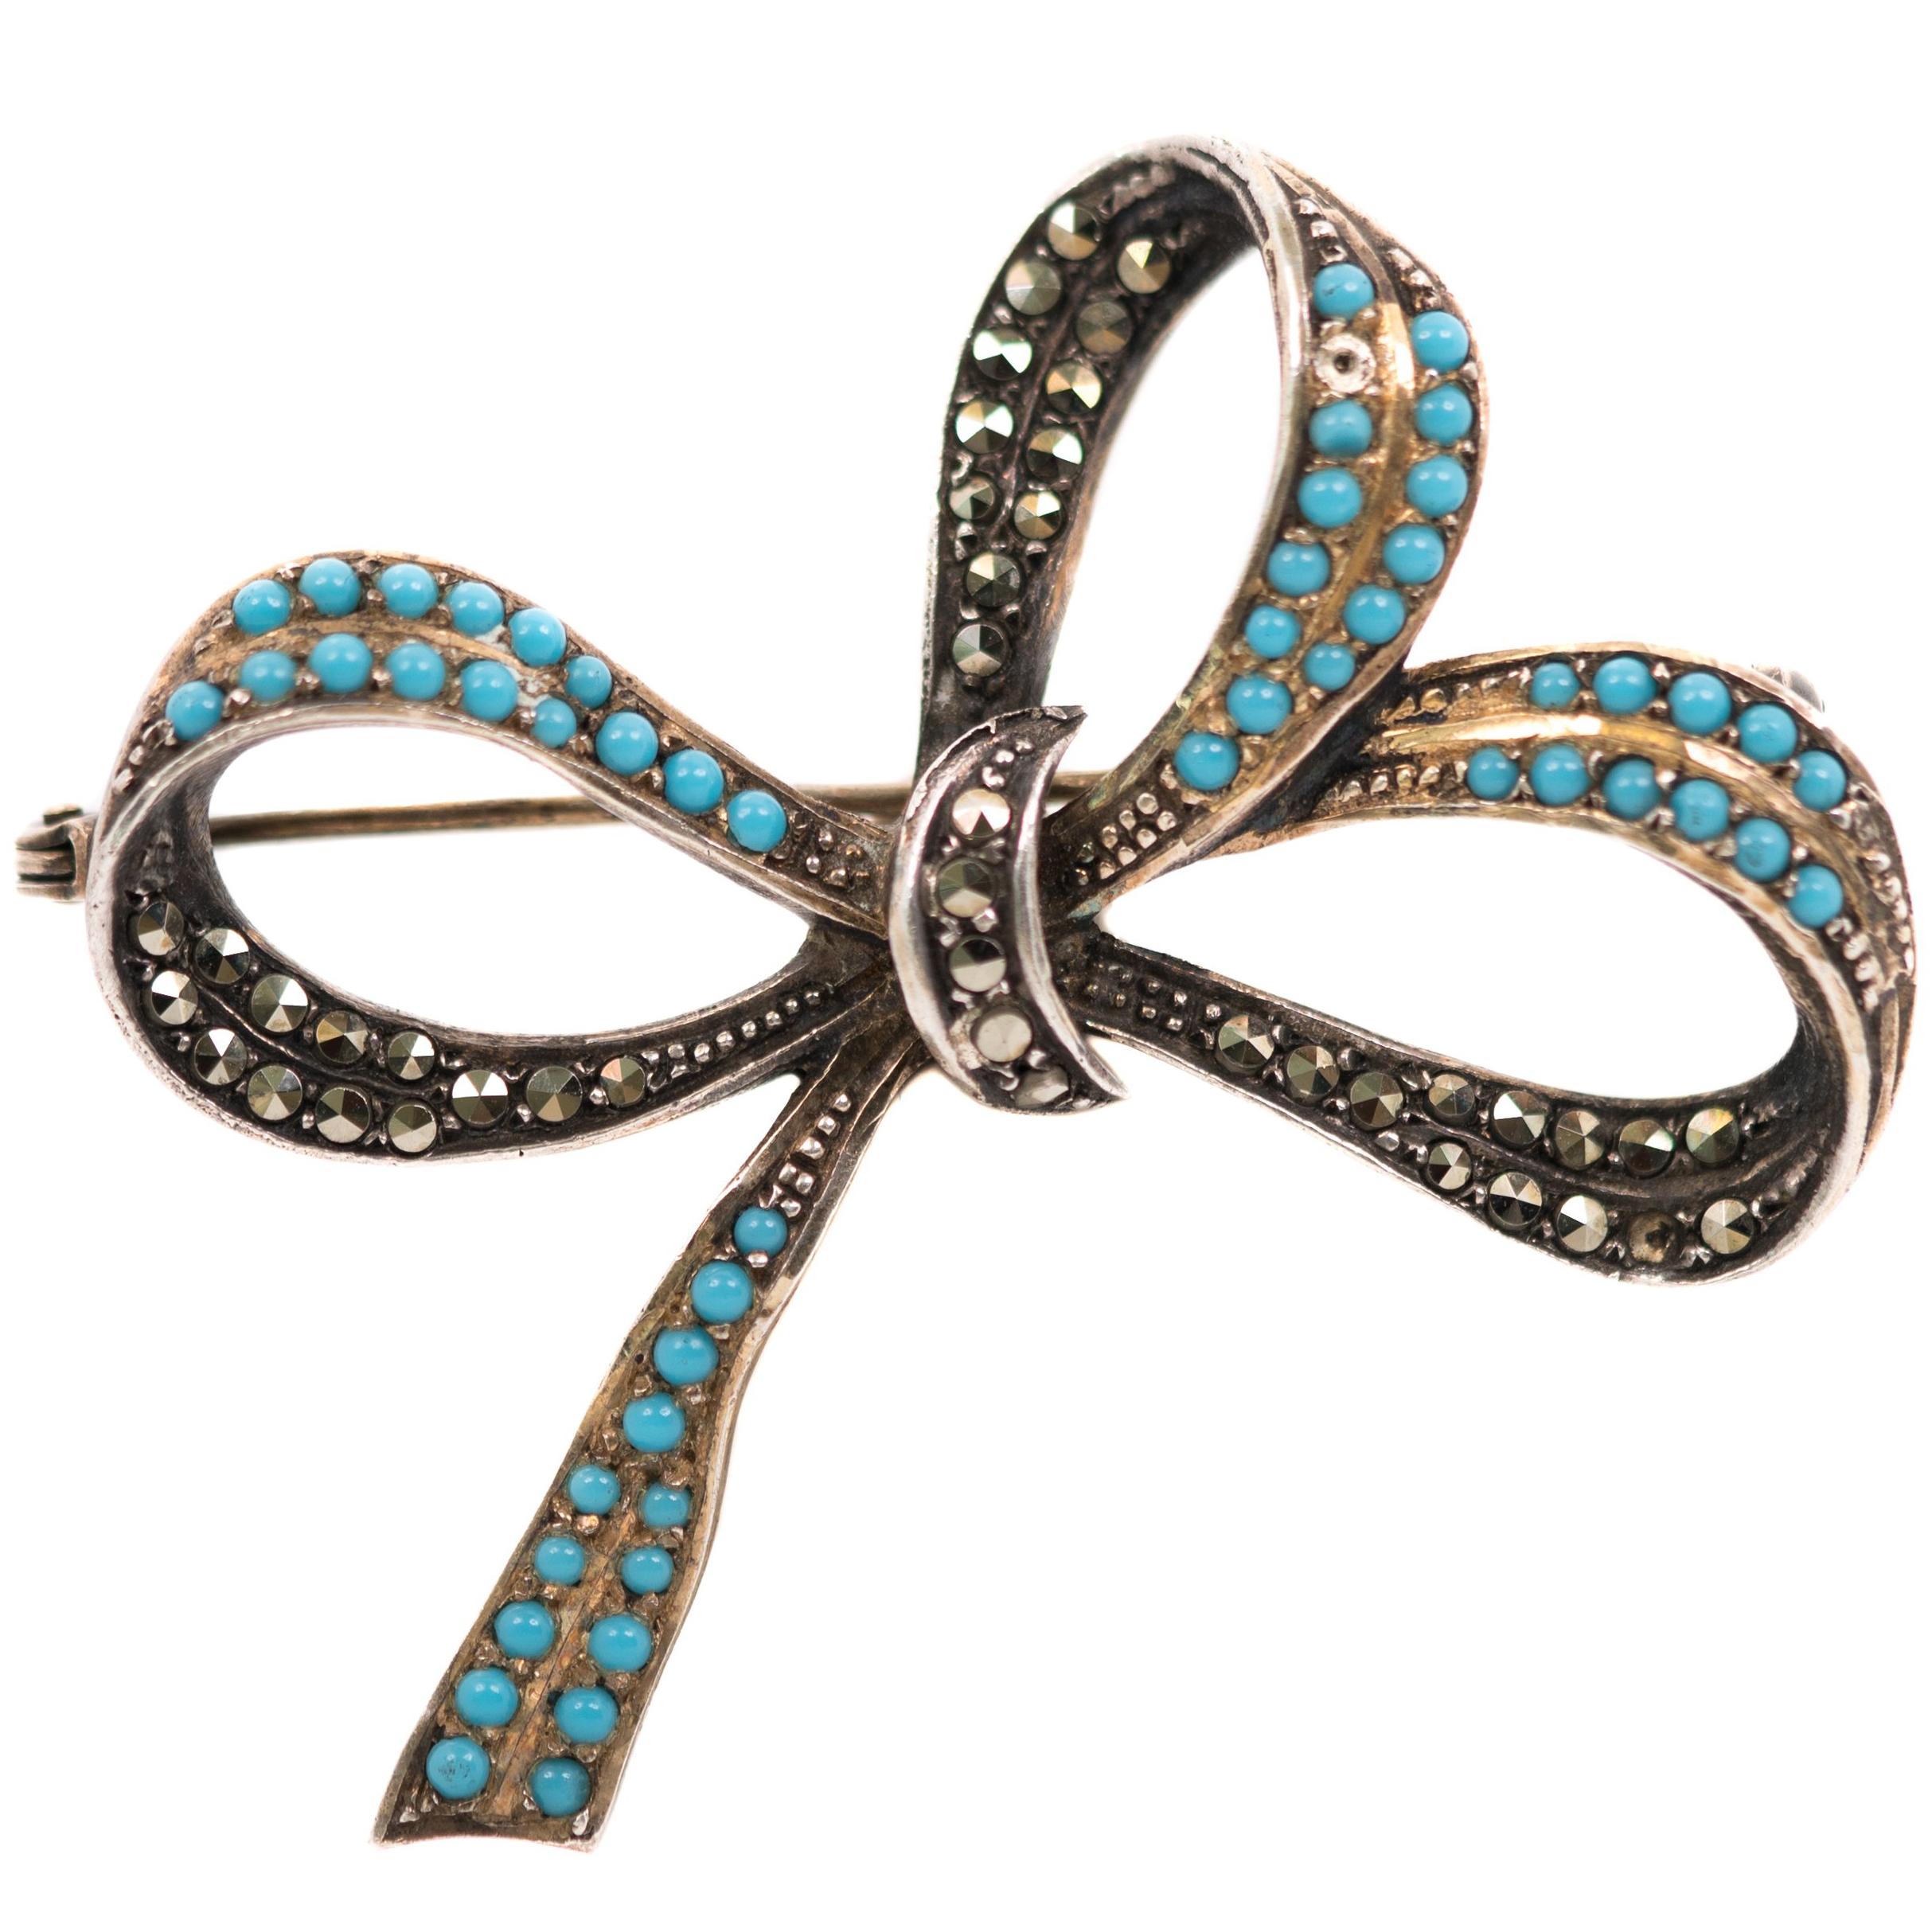 1930s Sterling Silver, Marcasite, Turquoise Ribbon Bow Brooch